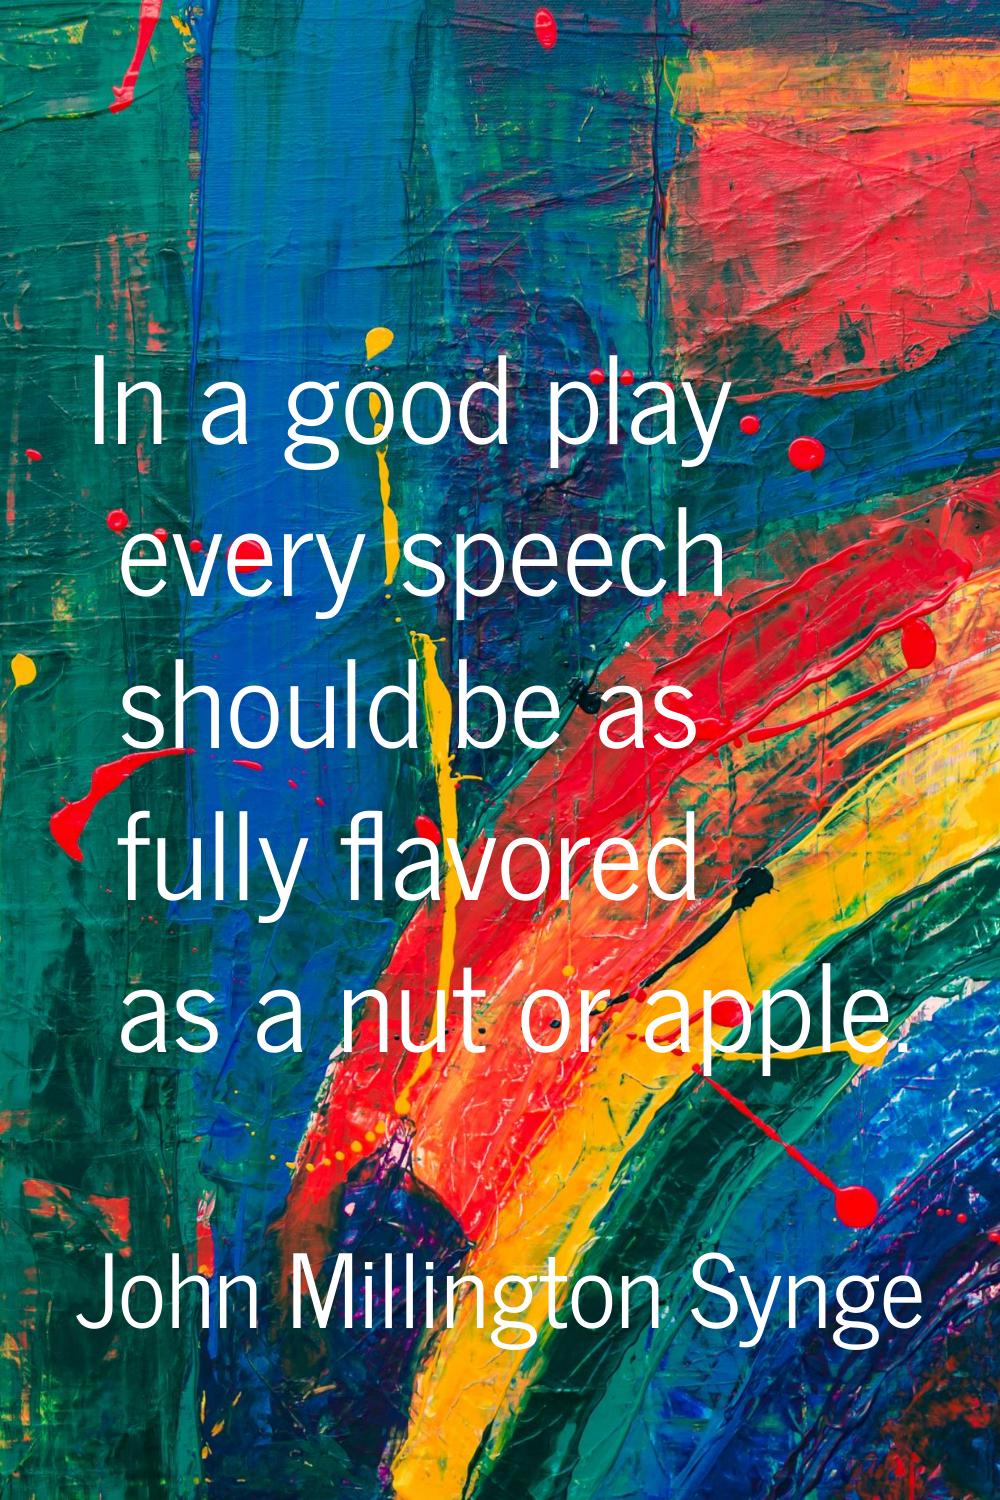 In a good play every speech should be as fully flavored as a nut or apple.